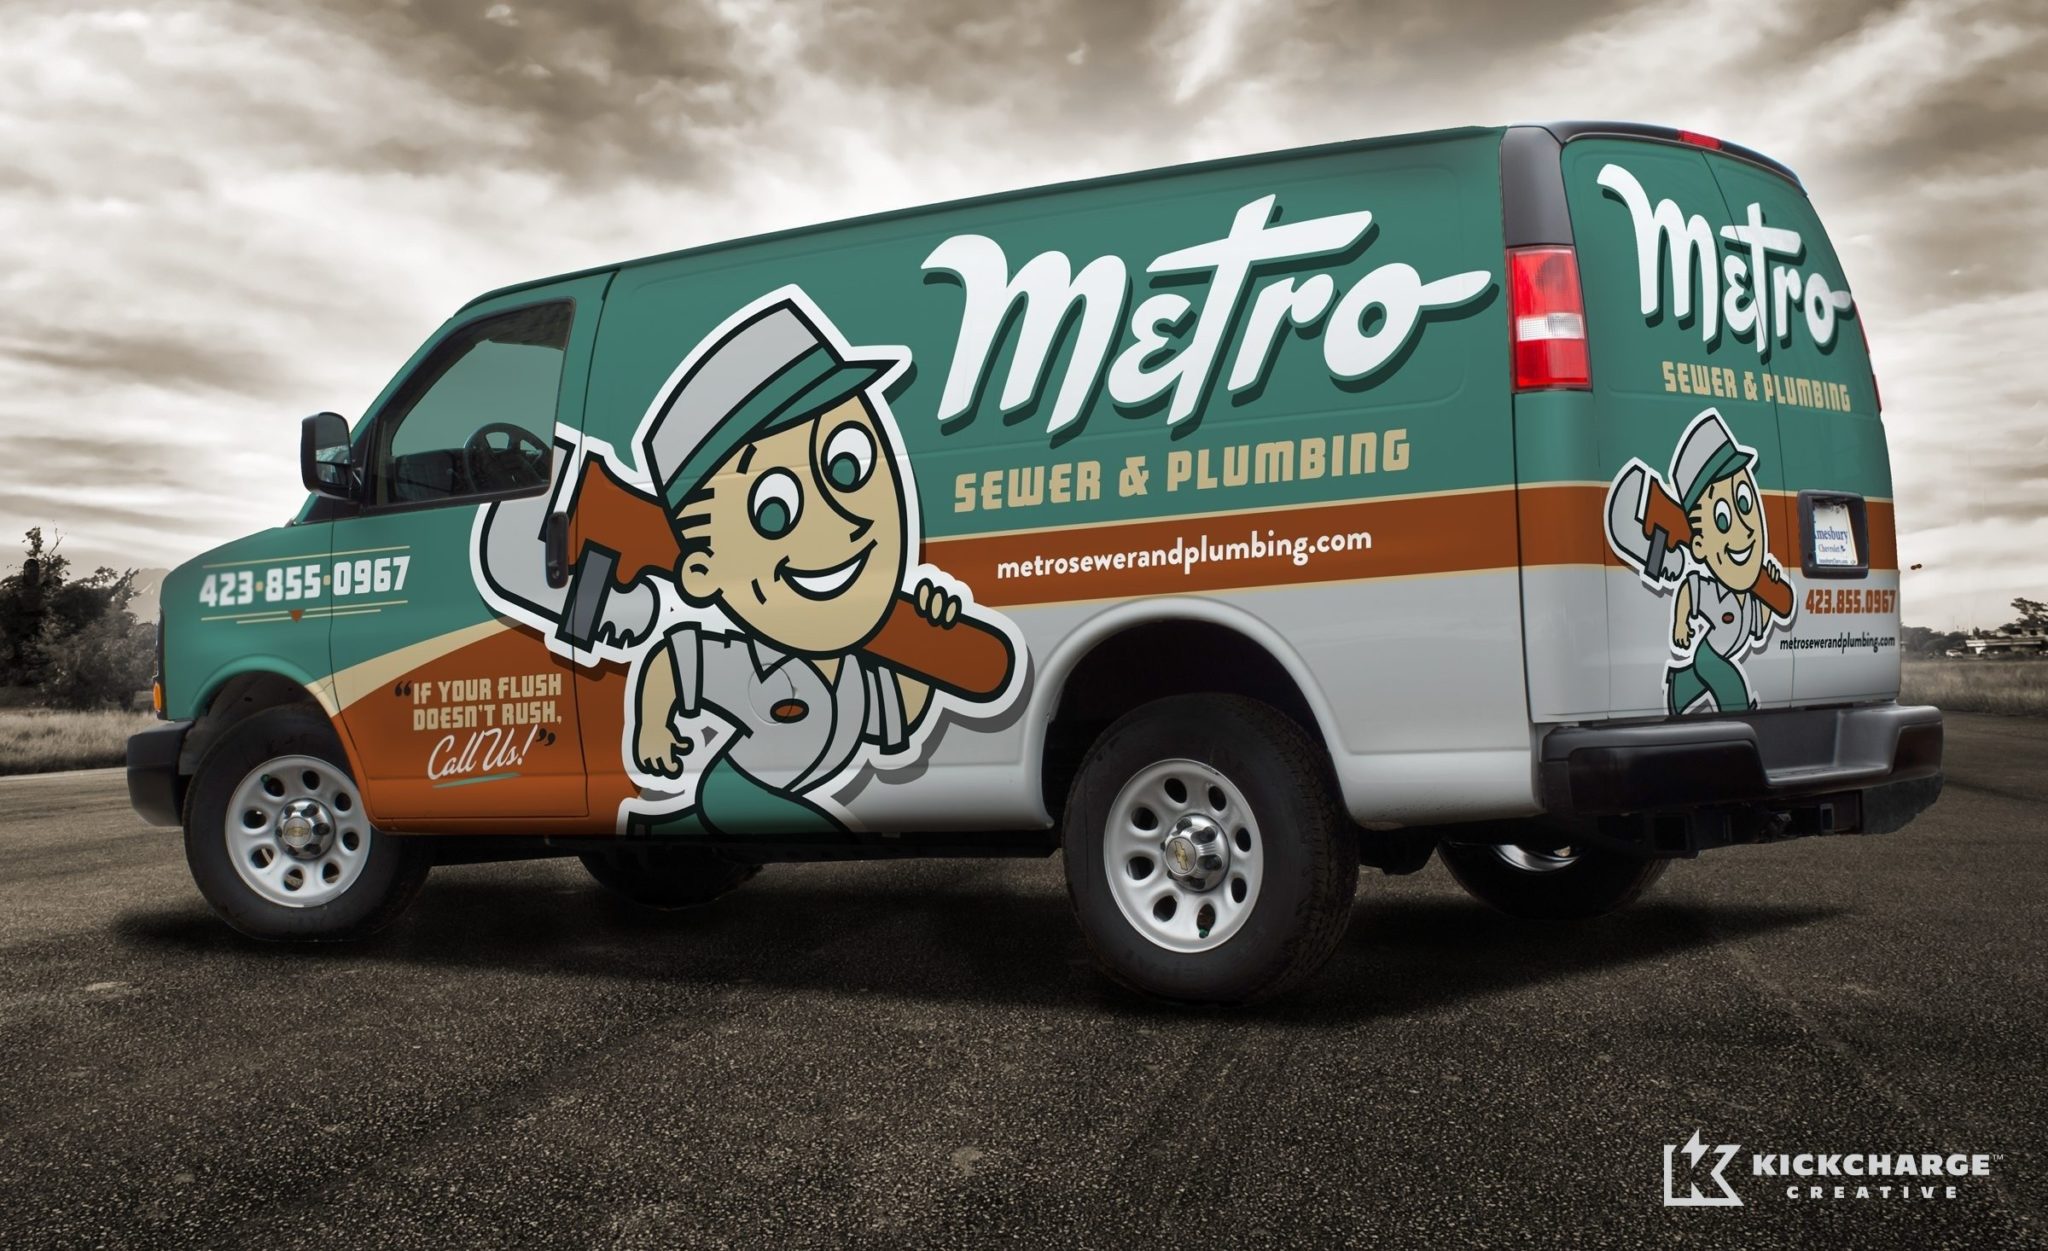 This visually captivating truck wrap for this plumbing contractor really speaks to a positive brand promise, while encouraging name recognition. The best truck wraps stand out, instead of blending with the rest of the visual clutter typical of this industry.